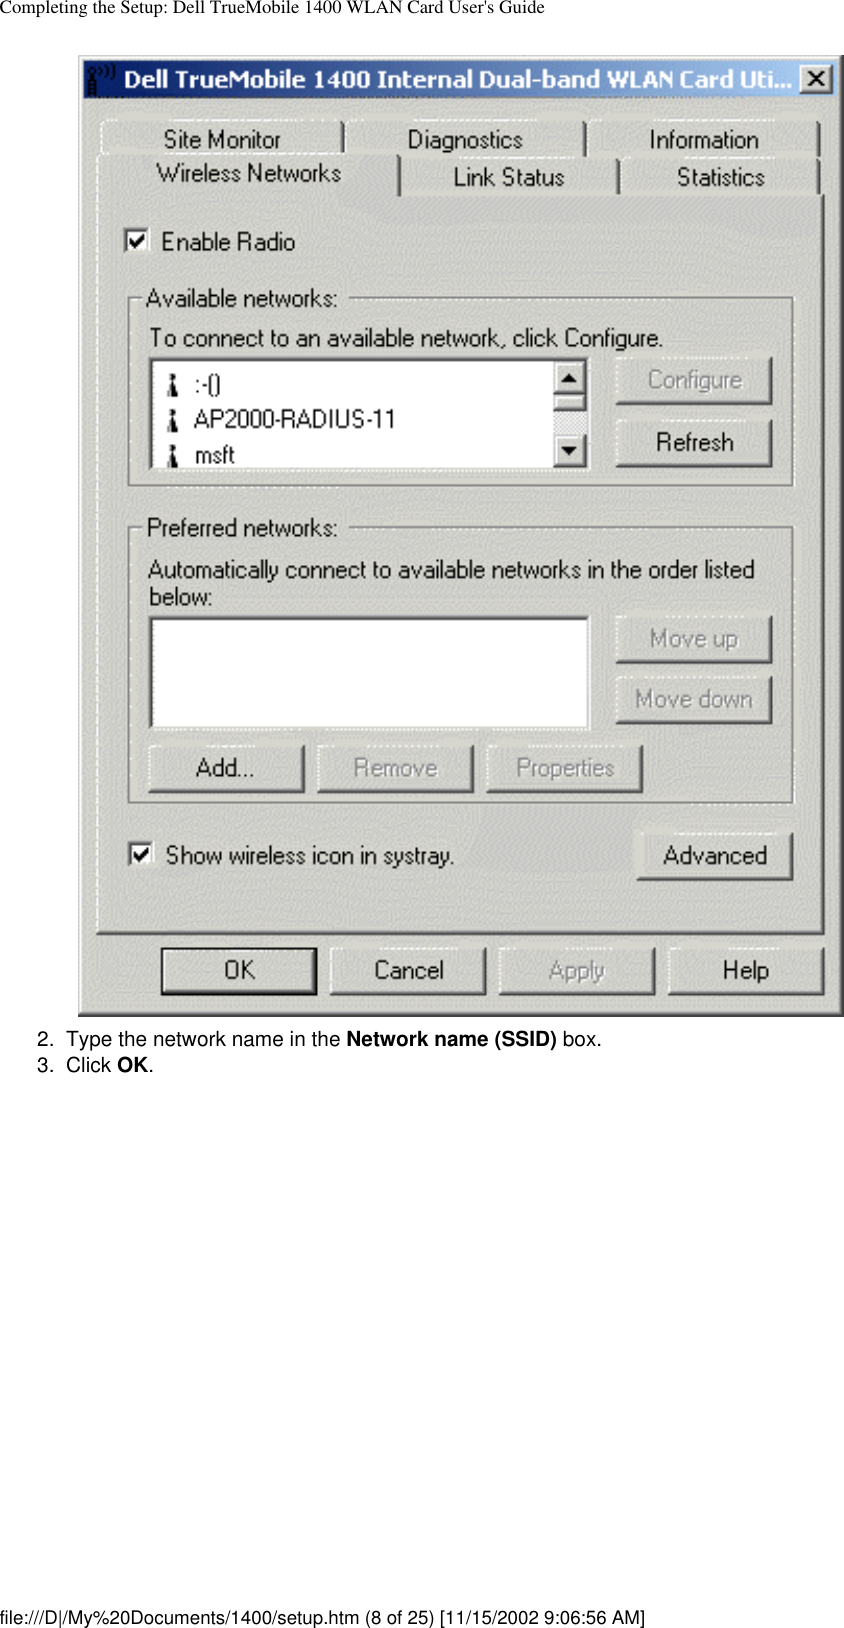 Completing the Setup: Dell TrueMobile 1400 WLAN Card User&apos;s Guide2.  Type the network name in the Network name (SSID) box.3.  Click OK. file:///D|/My%20Documents/1400/setup.htm (8 of 25) [11/15/2002 9:06:56 AM]